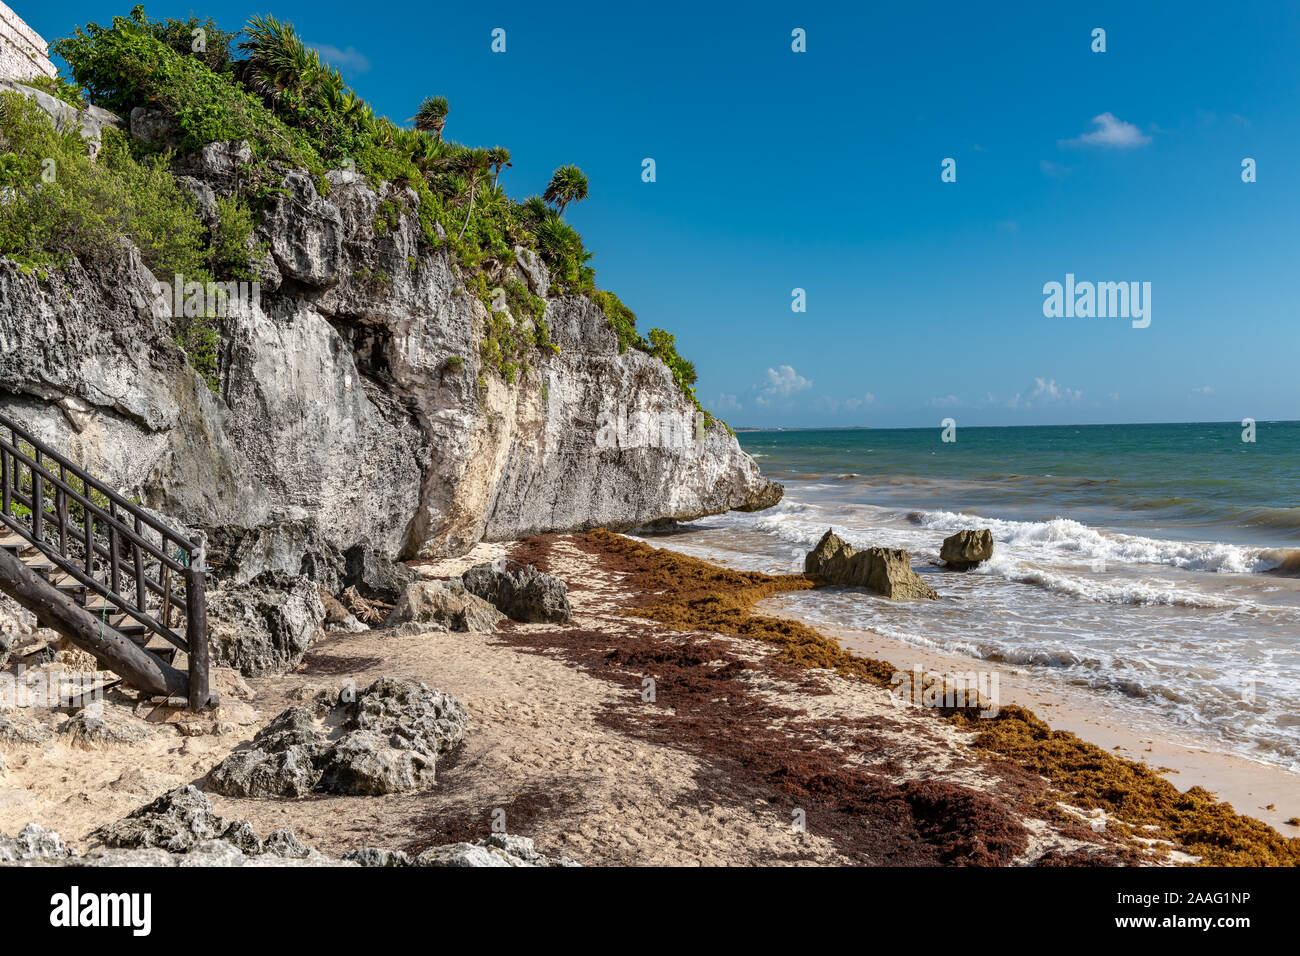 Beautiful beach in Tulum Mexico, Mayan ruins on top of the cliff. Stock Photo